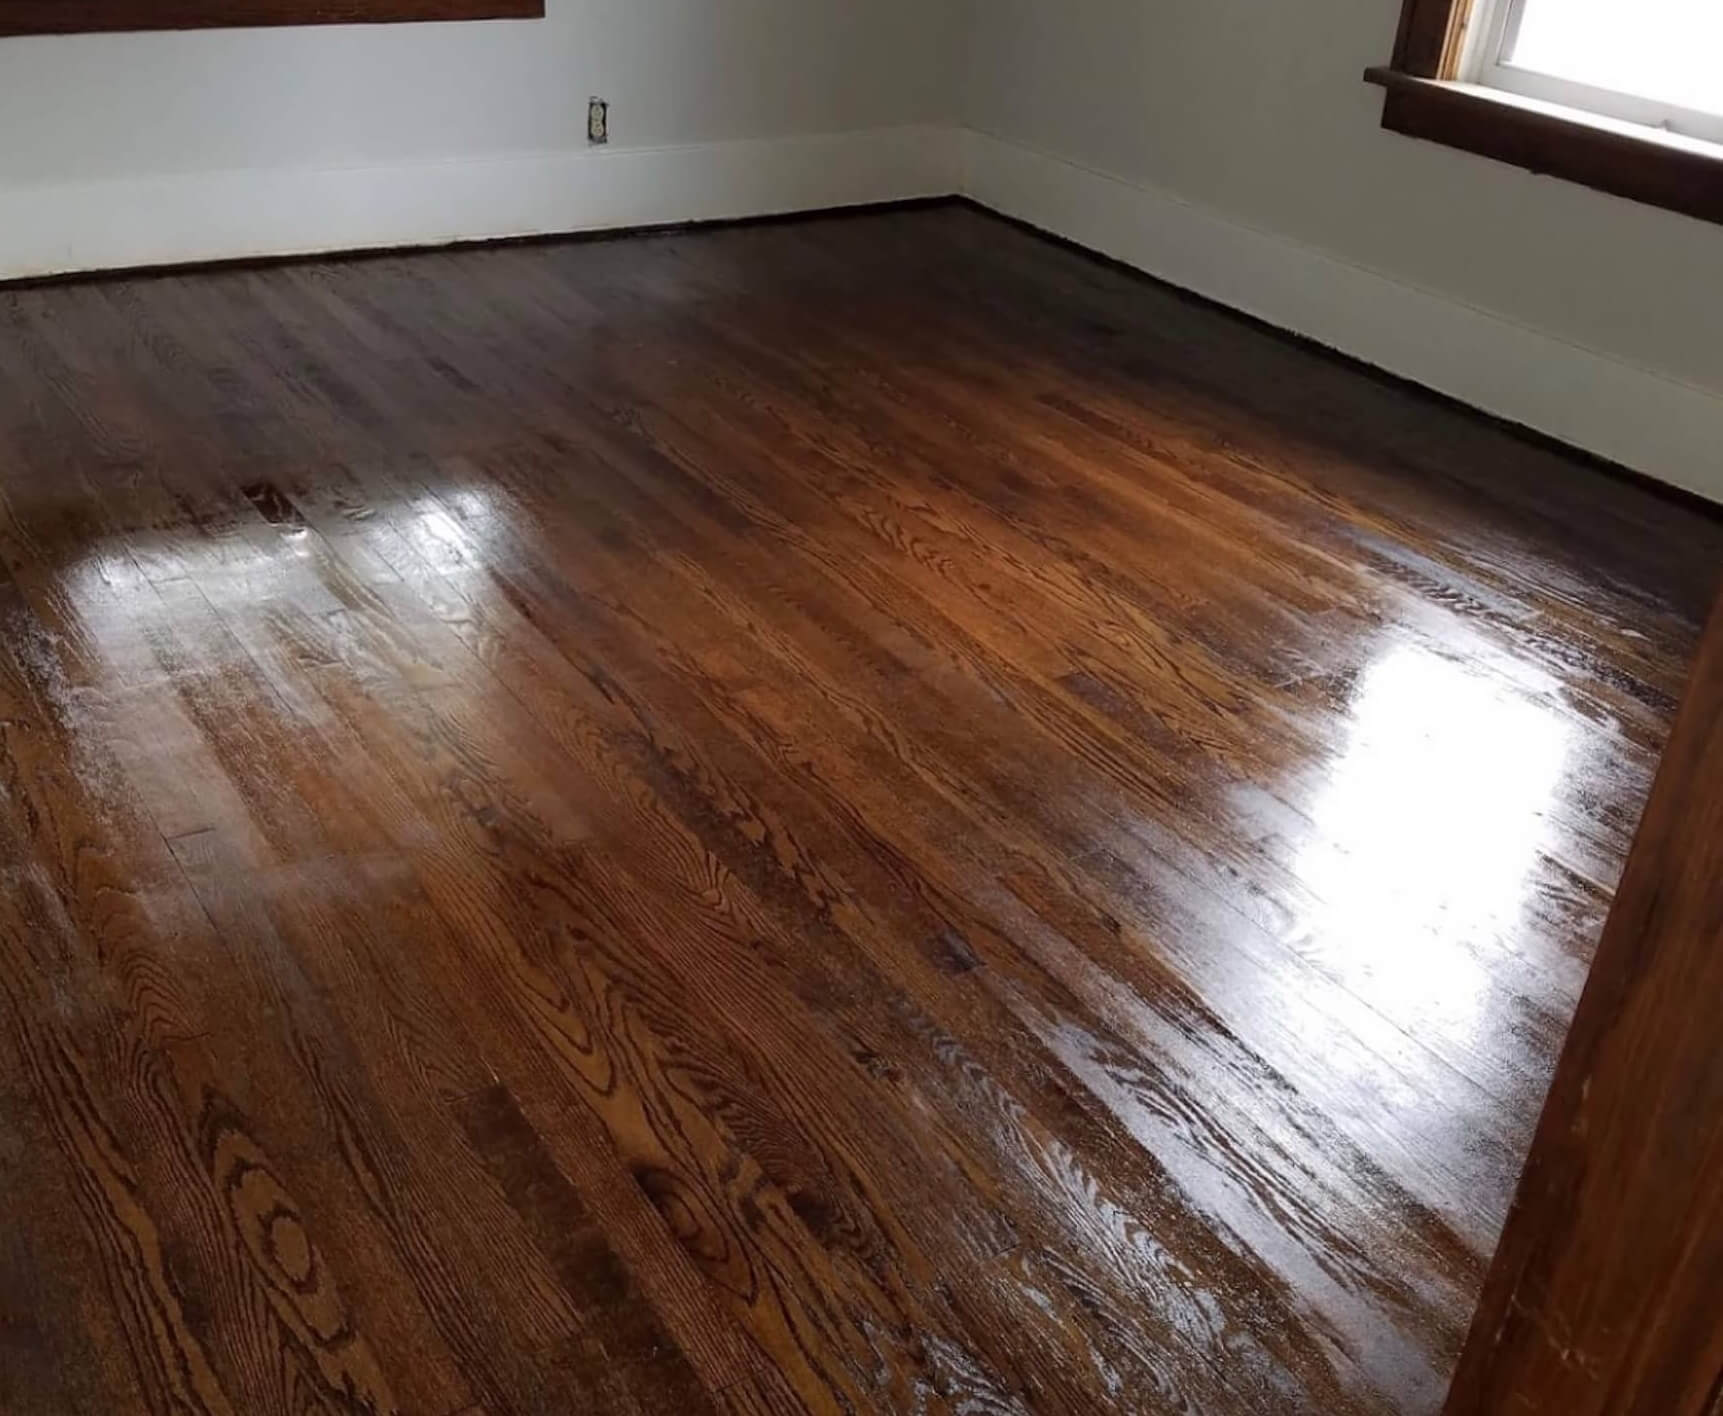 a cleaned up and refinished hardwood floor